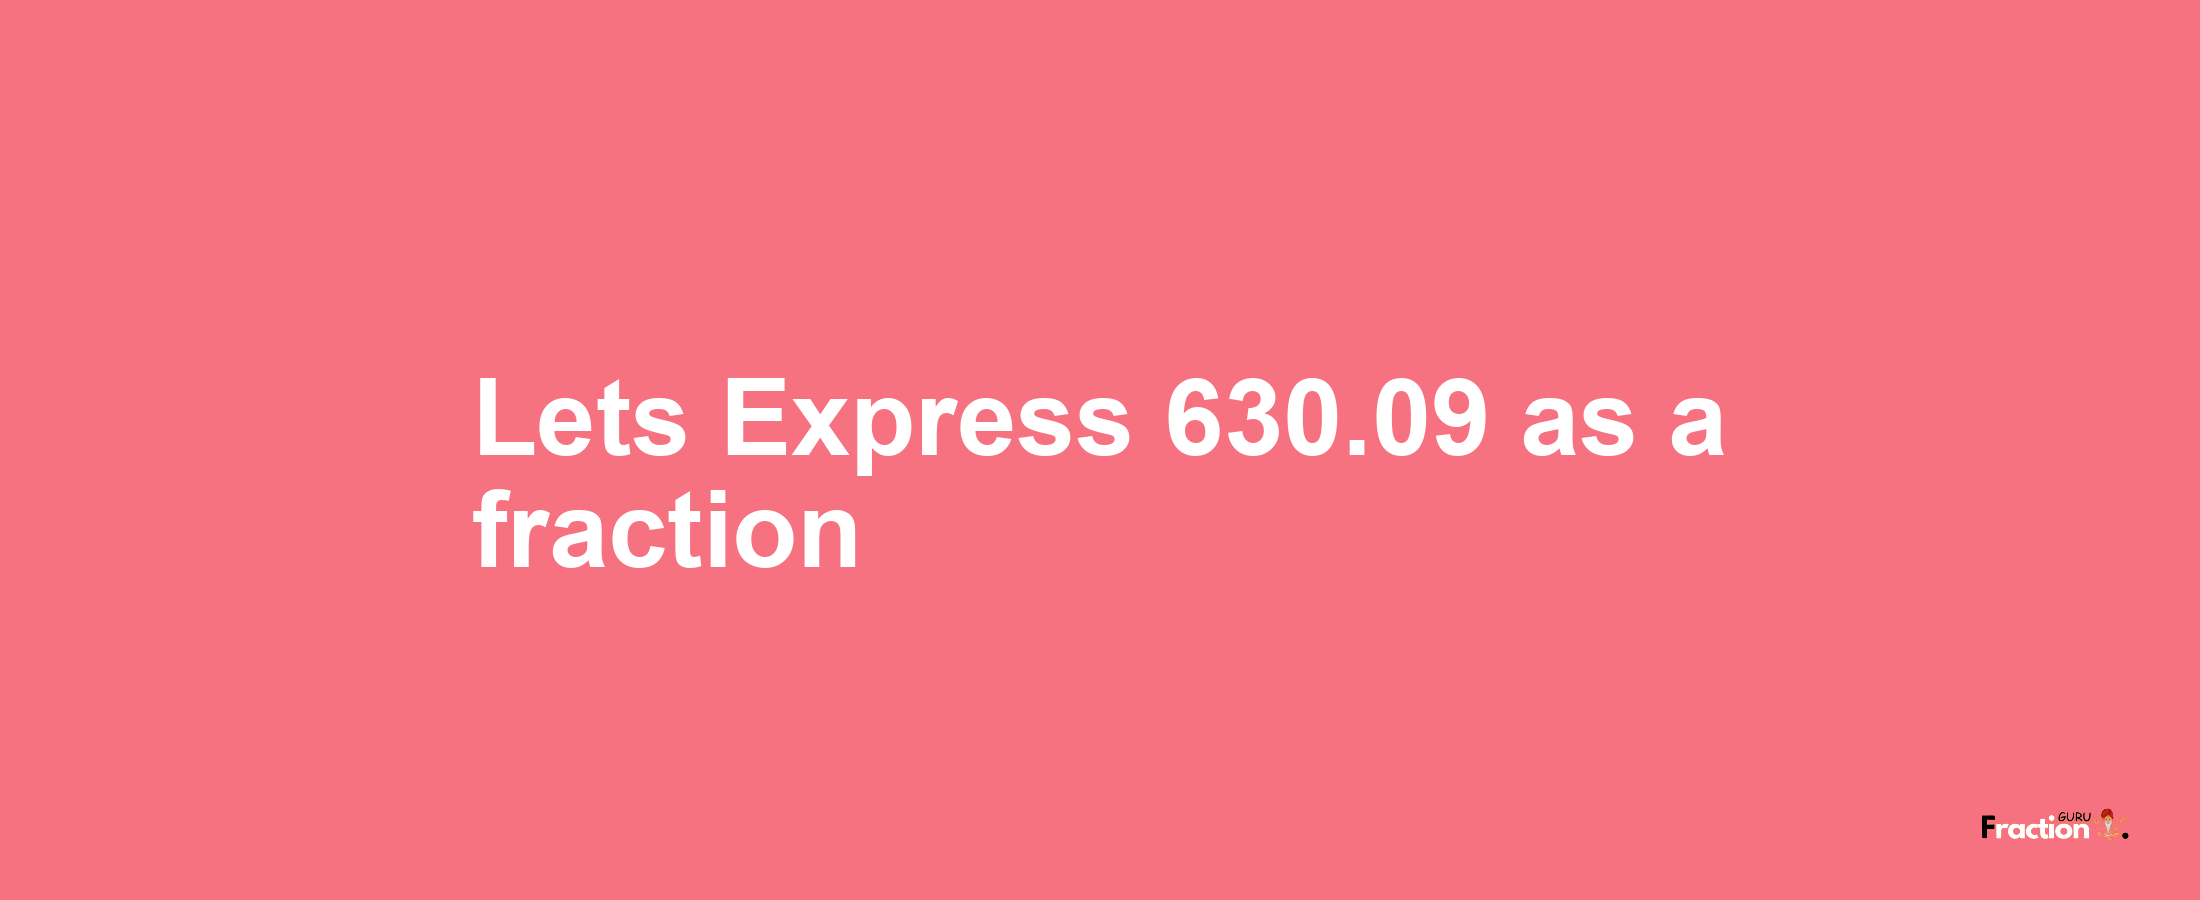 Lets Express 630.09 as afraction